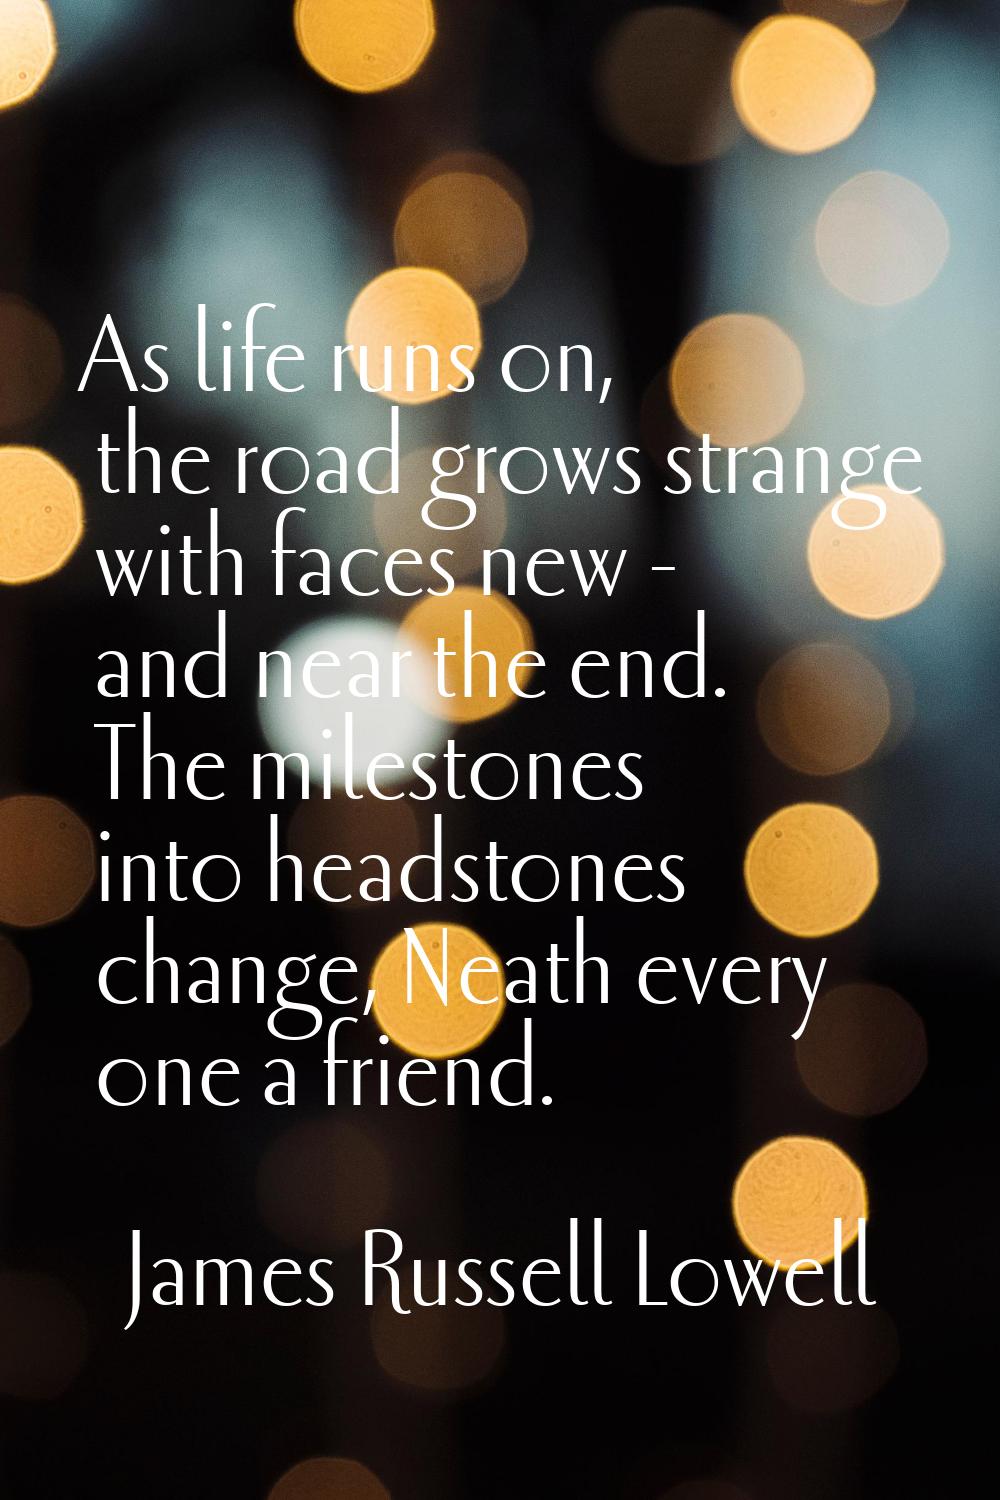 As life runs on, the road grows strange with faces new - and near the end. The milestones into head